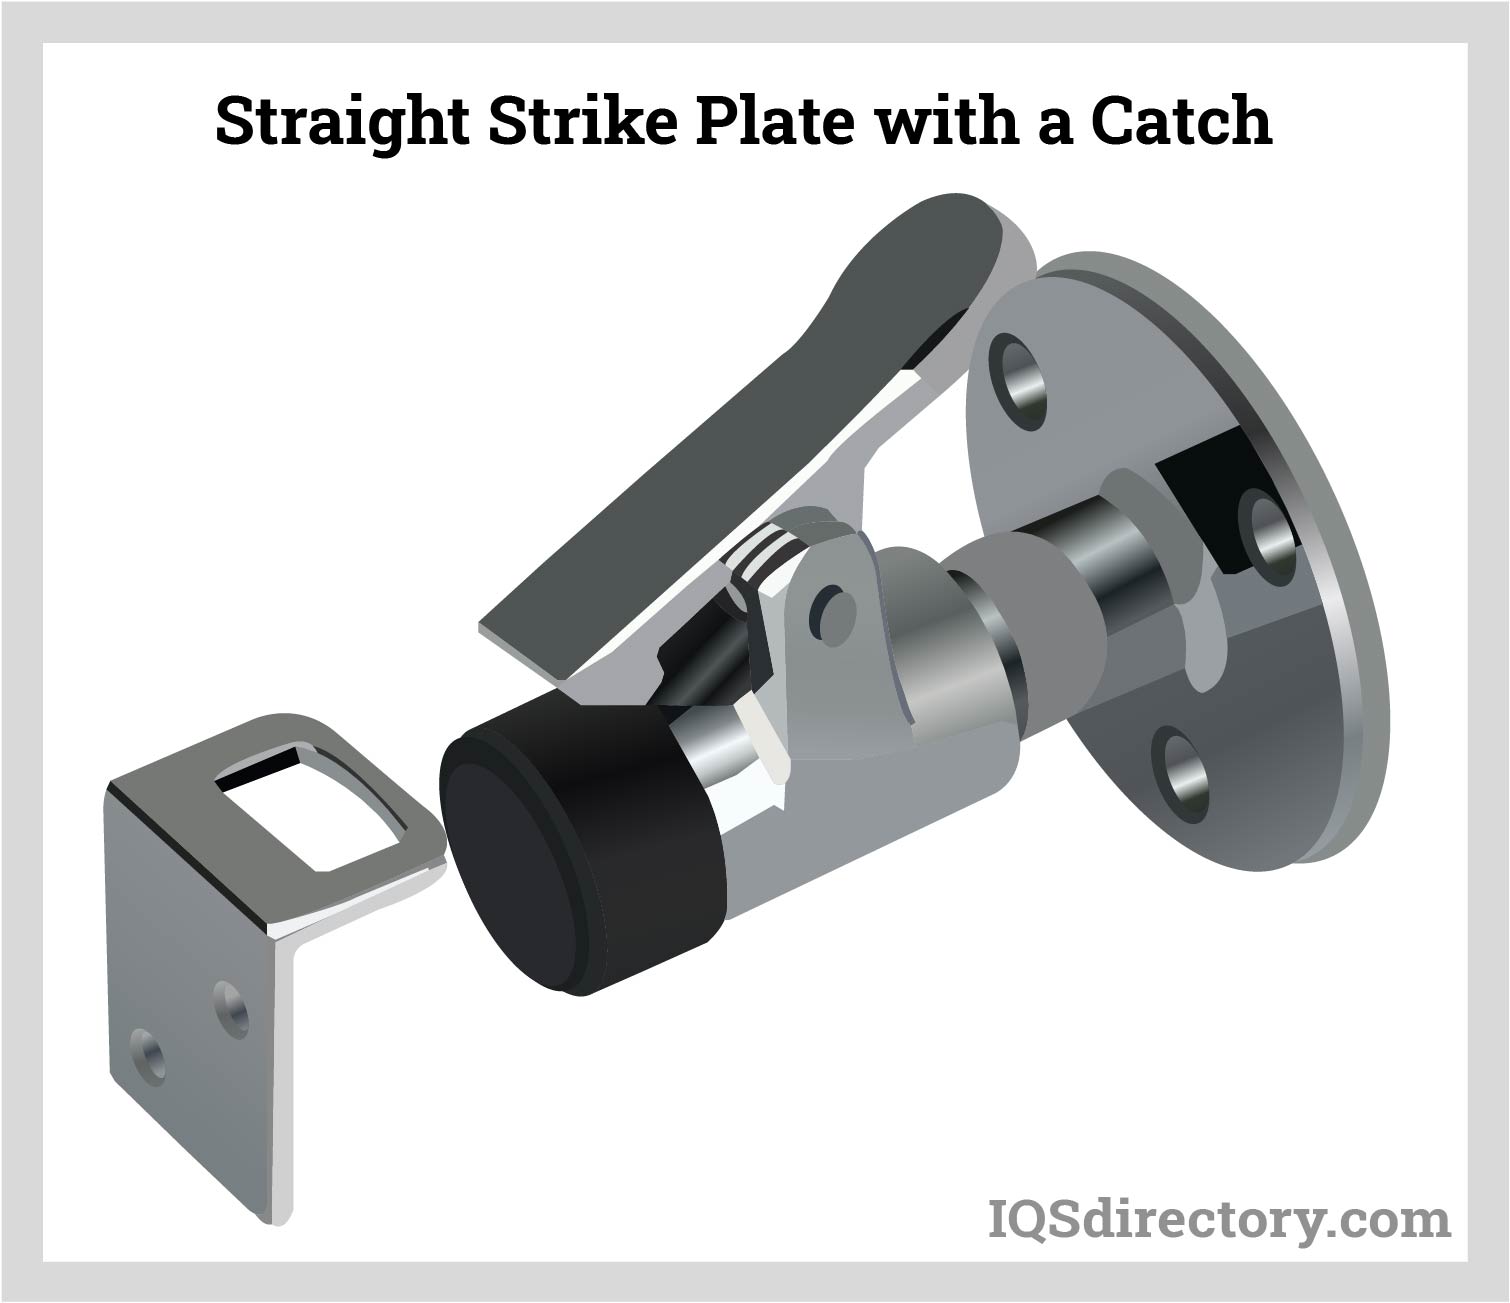 Straight Strike Plate with a Catch